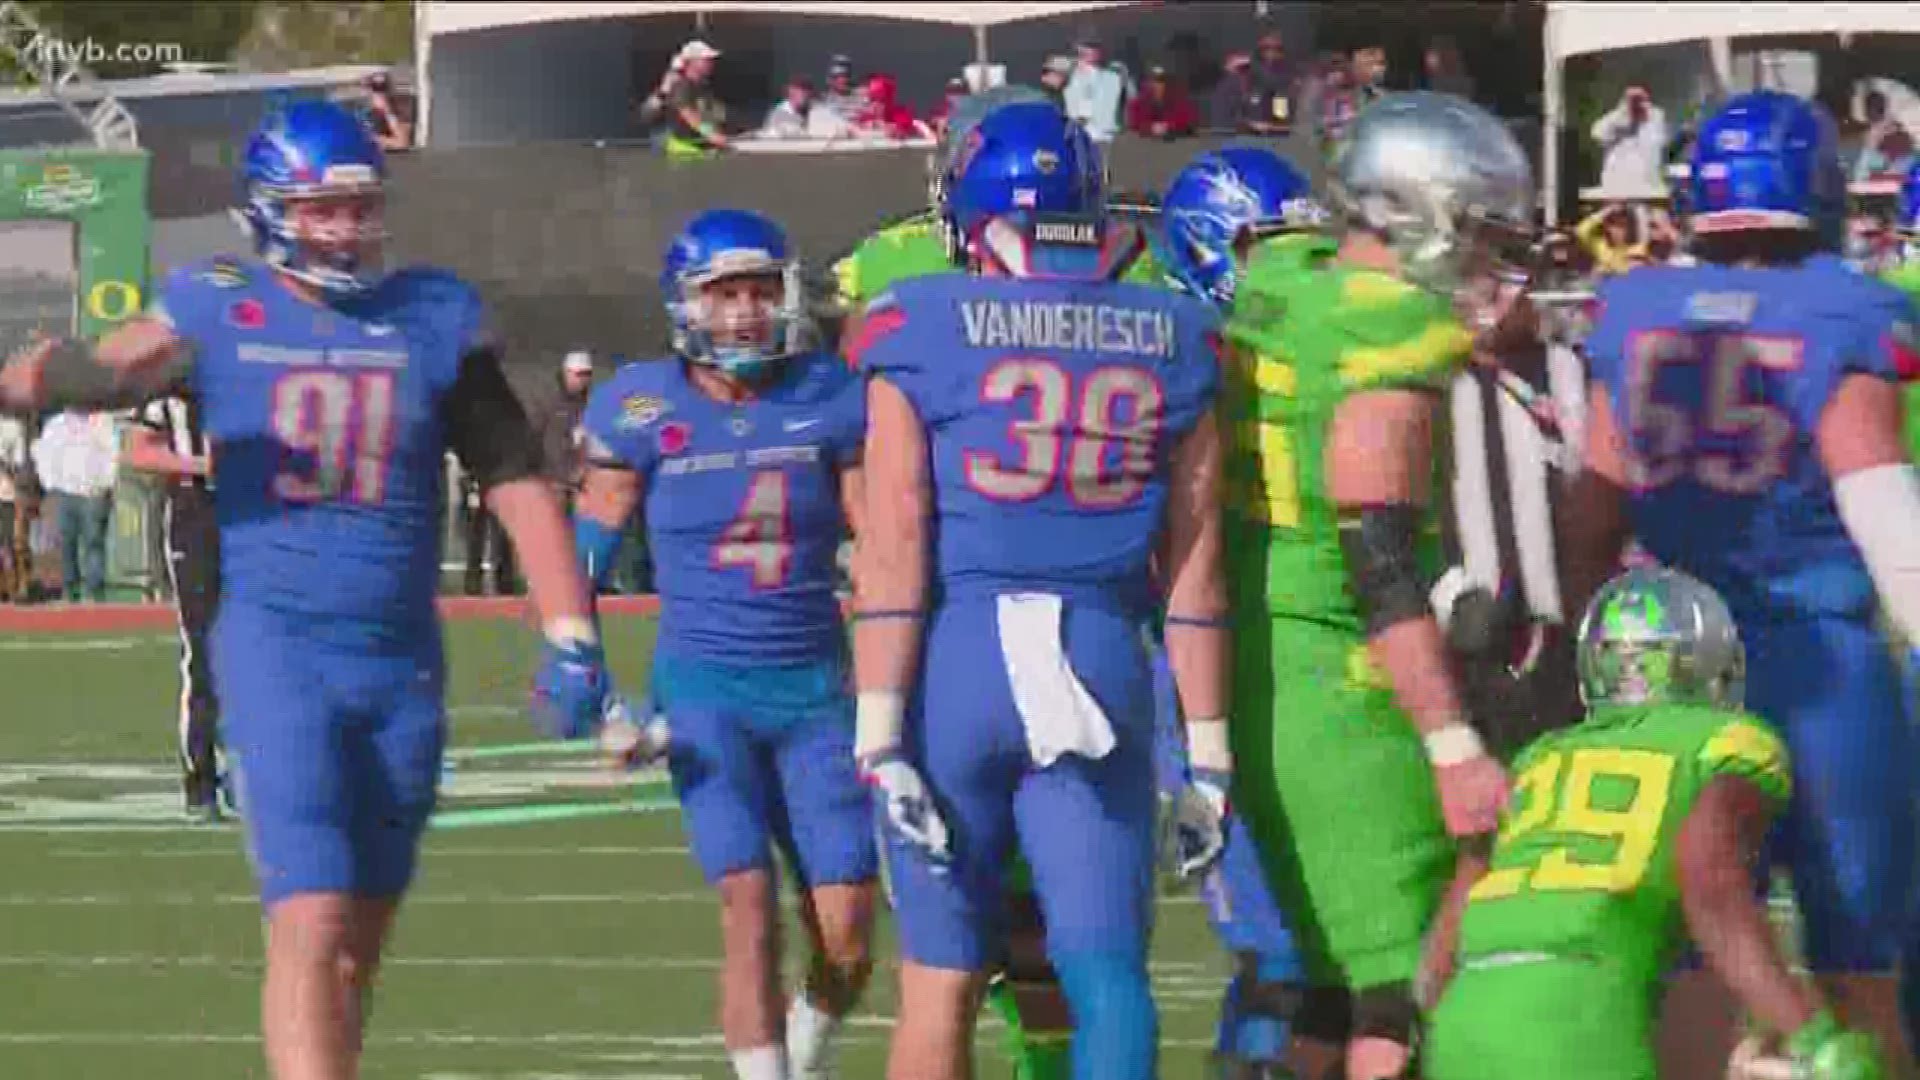 Boise State's Leighton Vander Esch announced Thursday that he plans to attend the NFL Draft